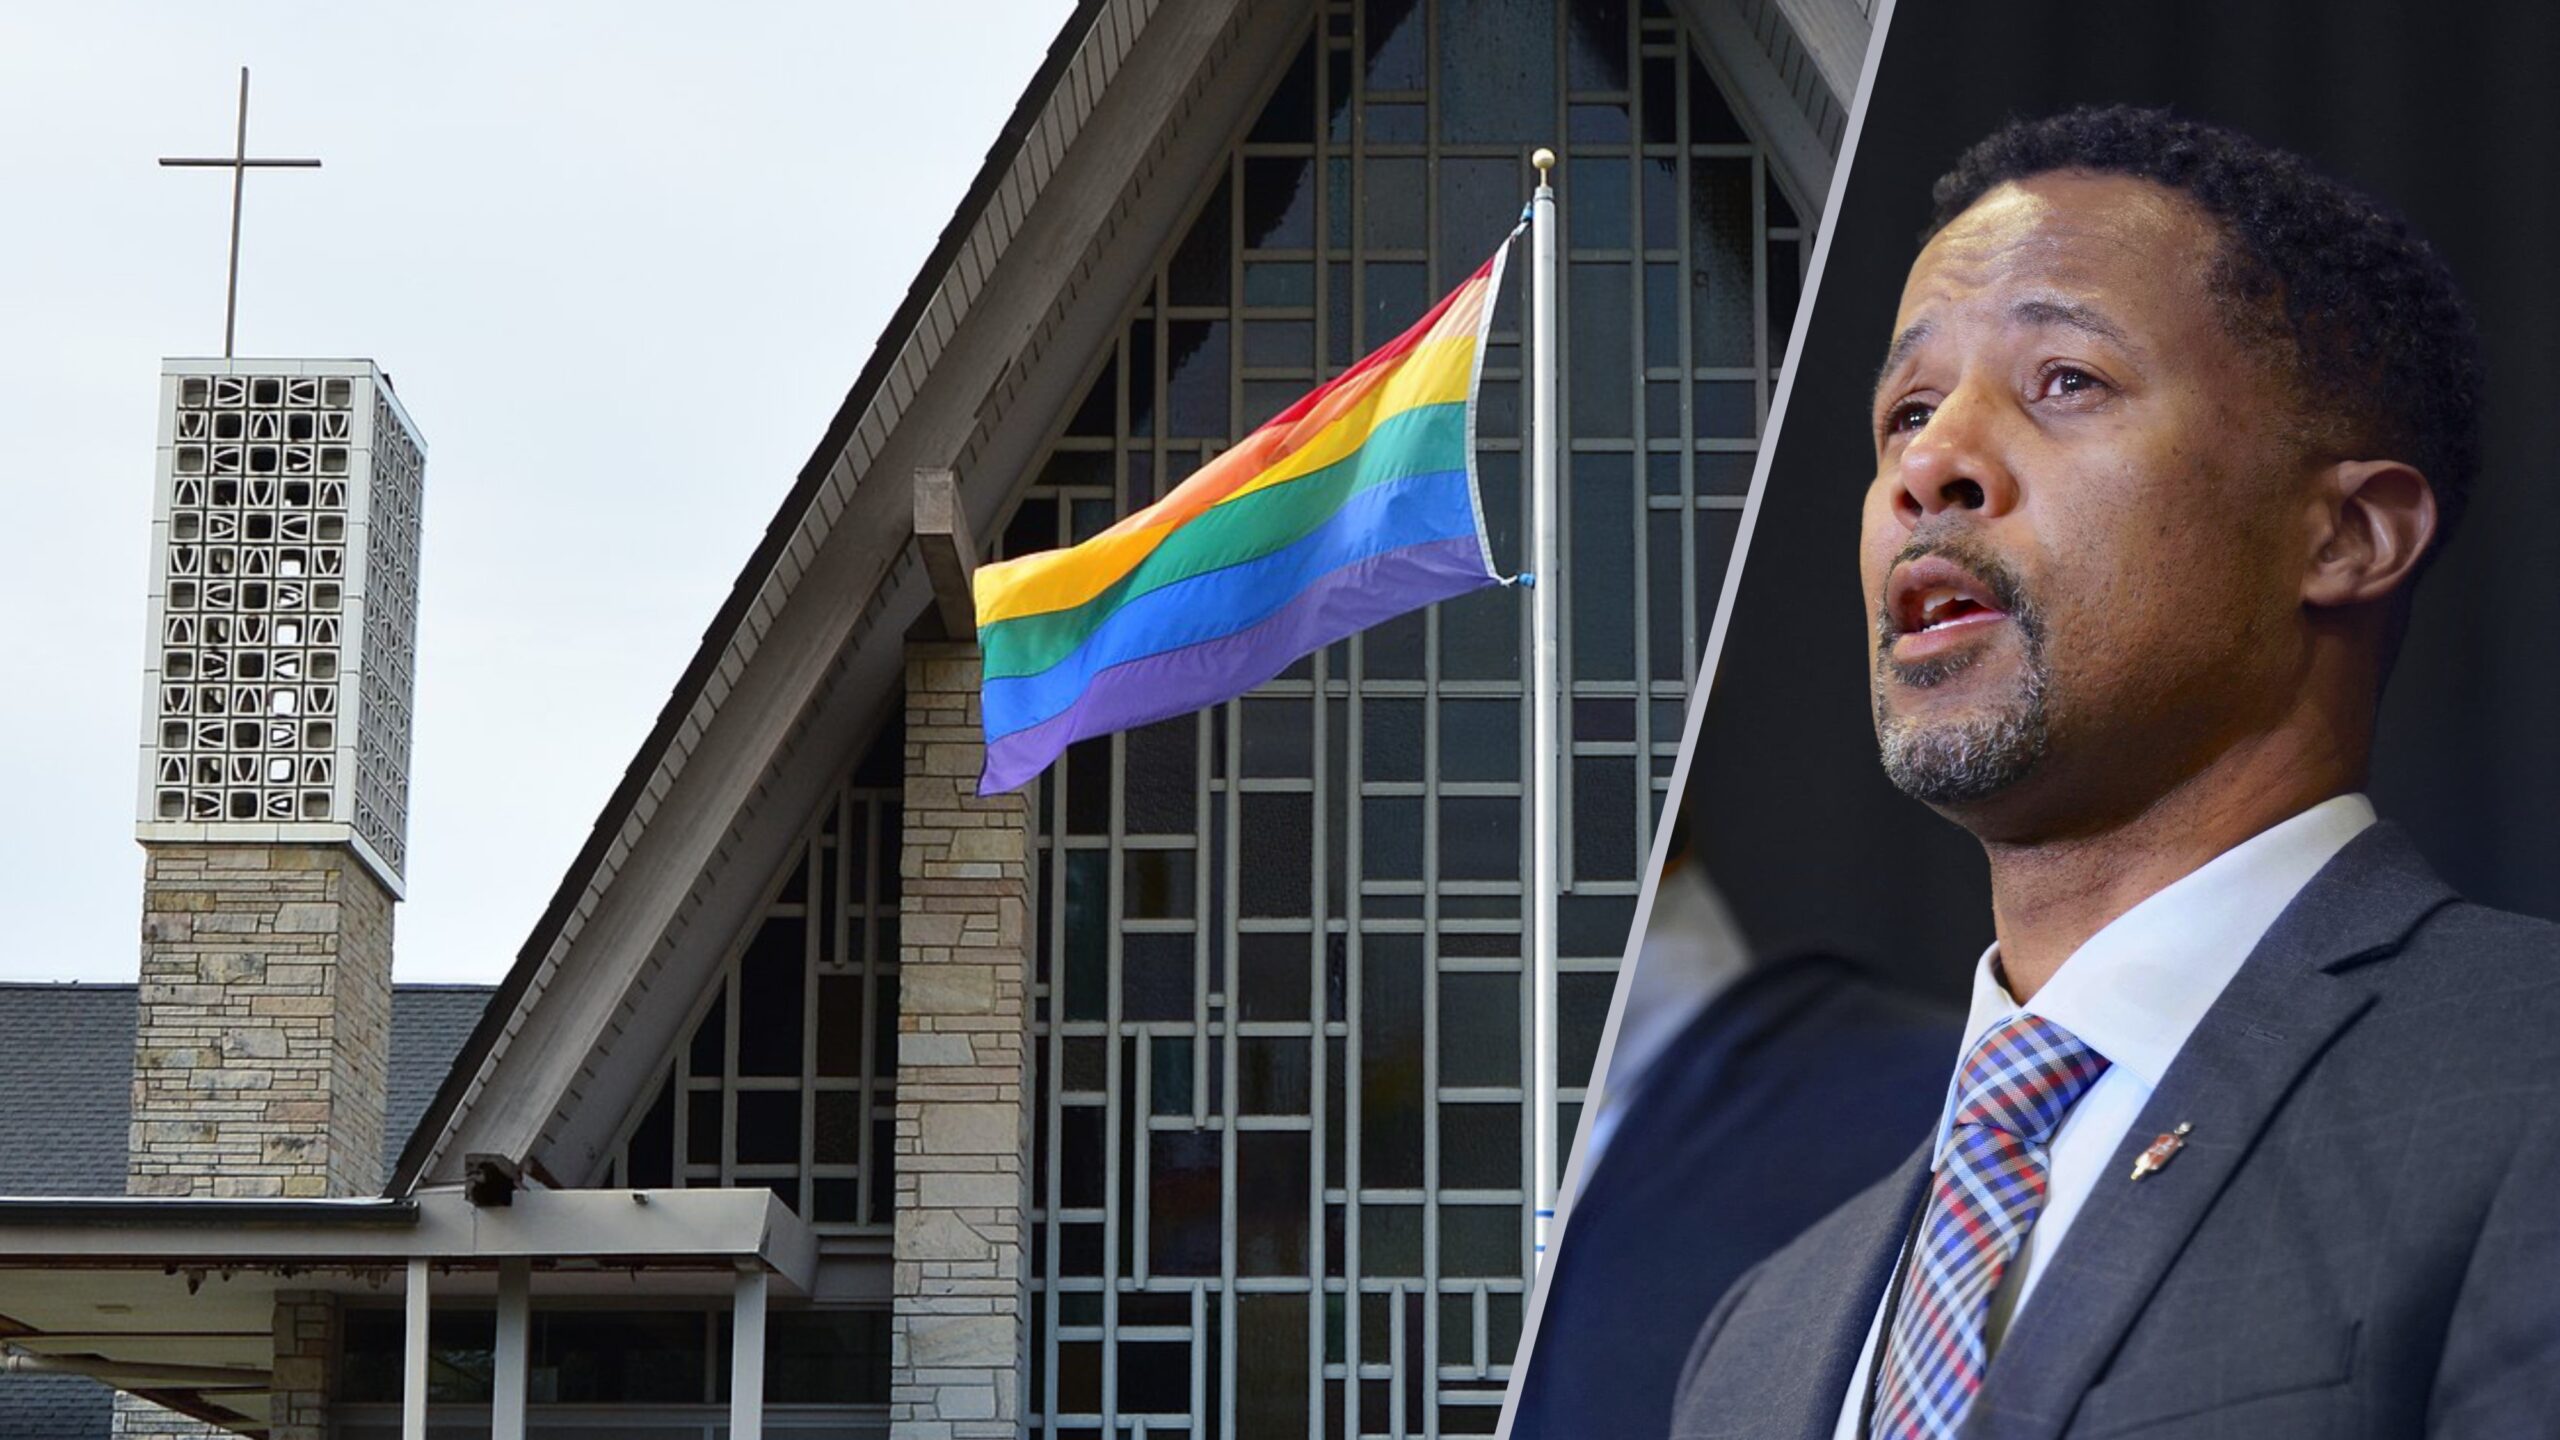 Yet Another Violation Of Biblical Principles: United Methodist Church Elects Gay Bishop - Harbingers Daily